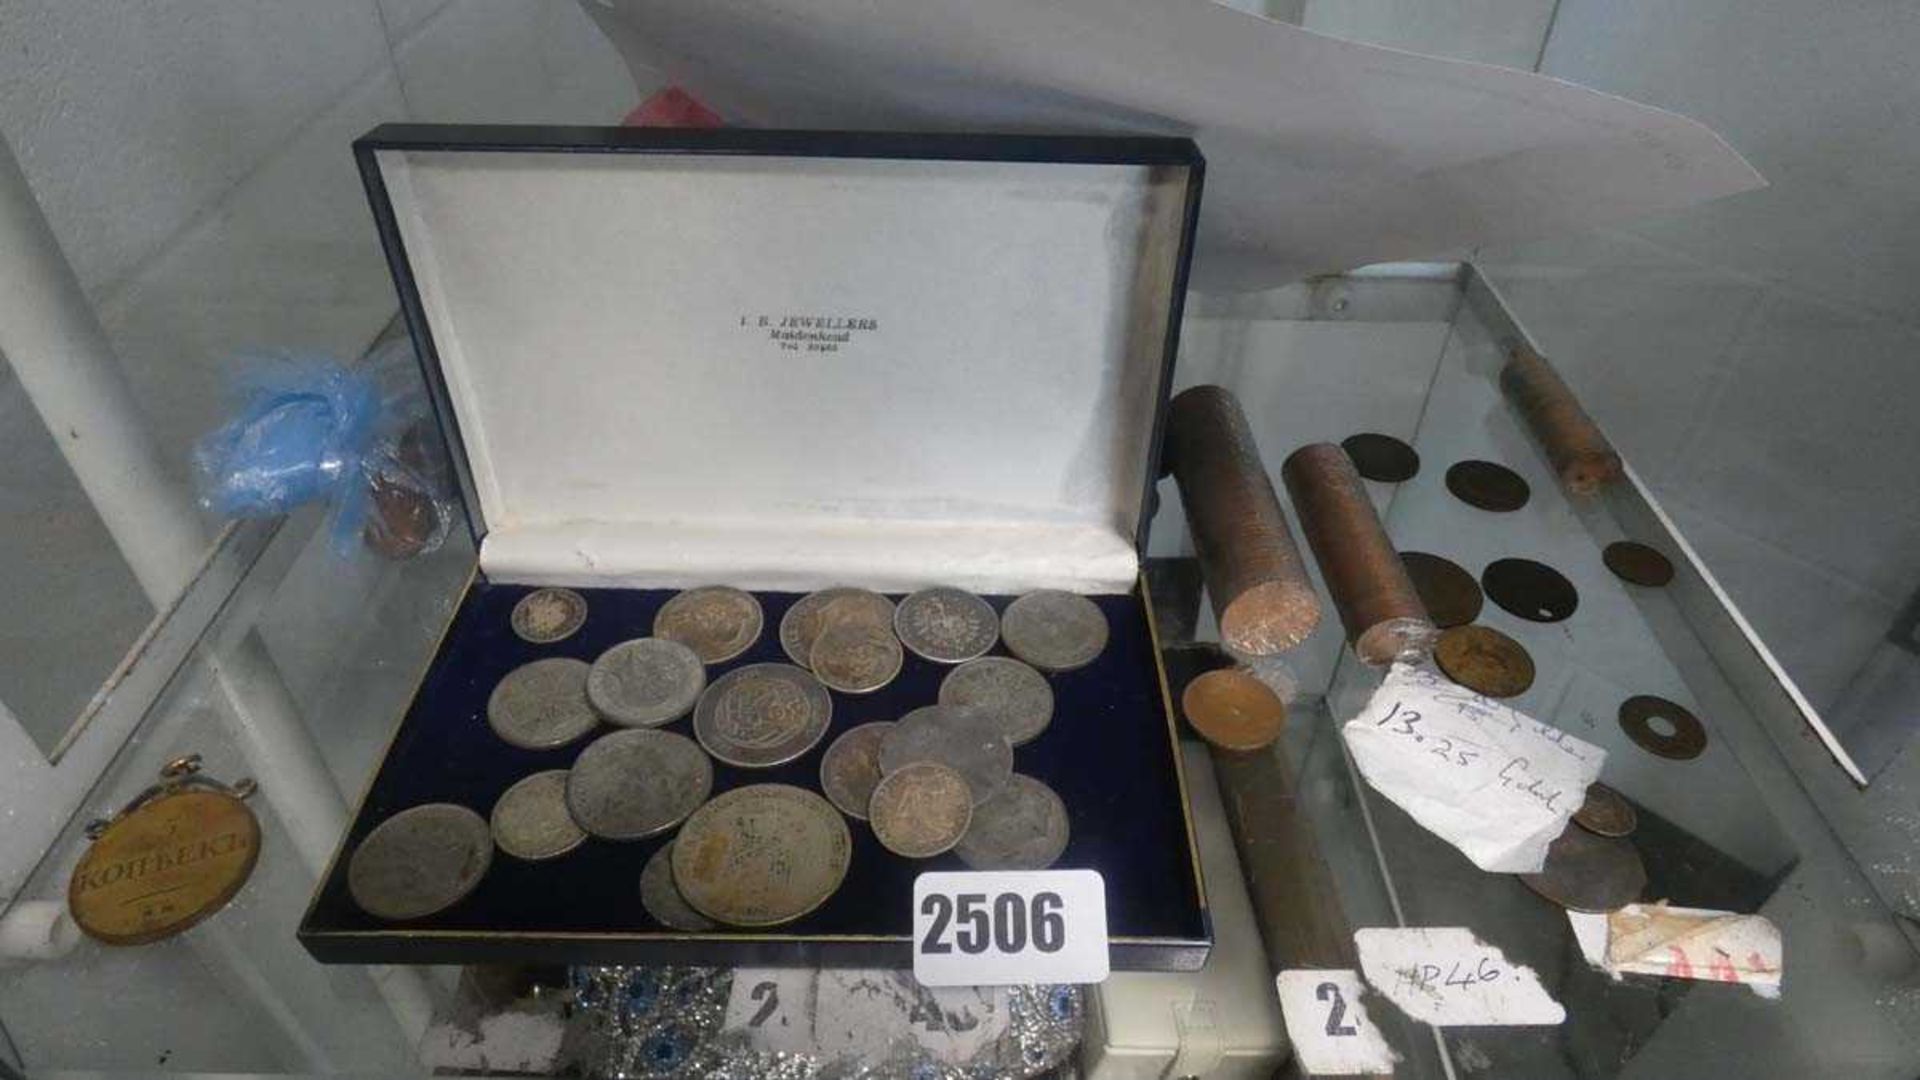 Tray containing various silver and other coins inc. Australian 1944 florin and 1877 German mark